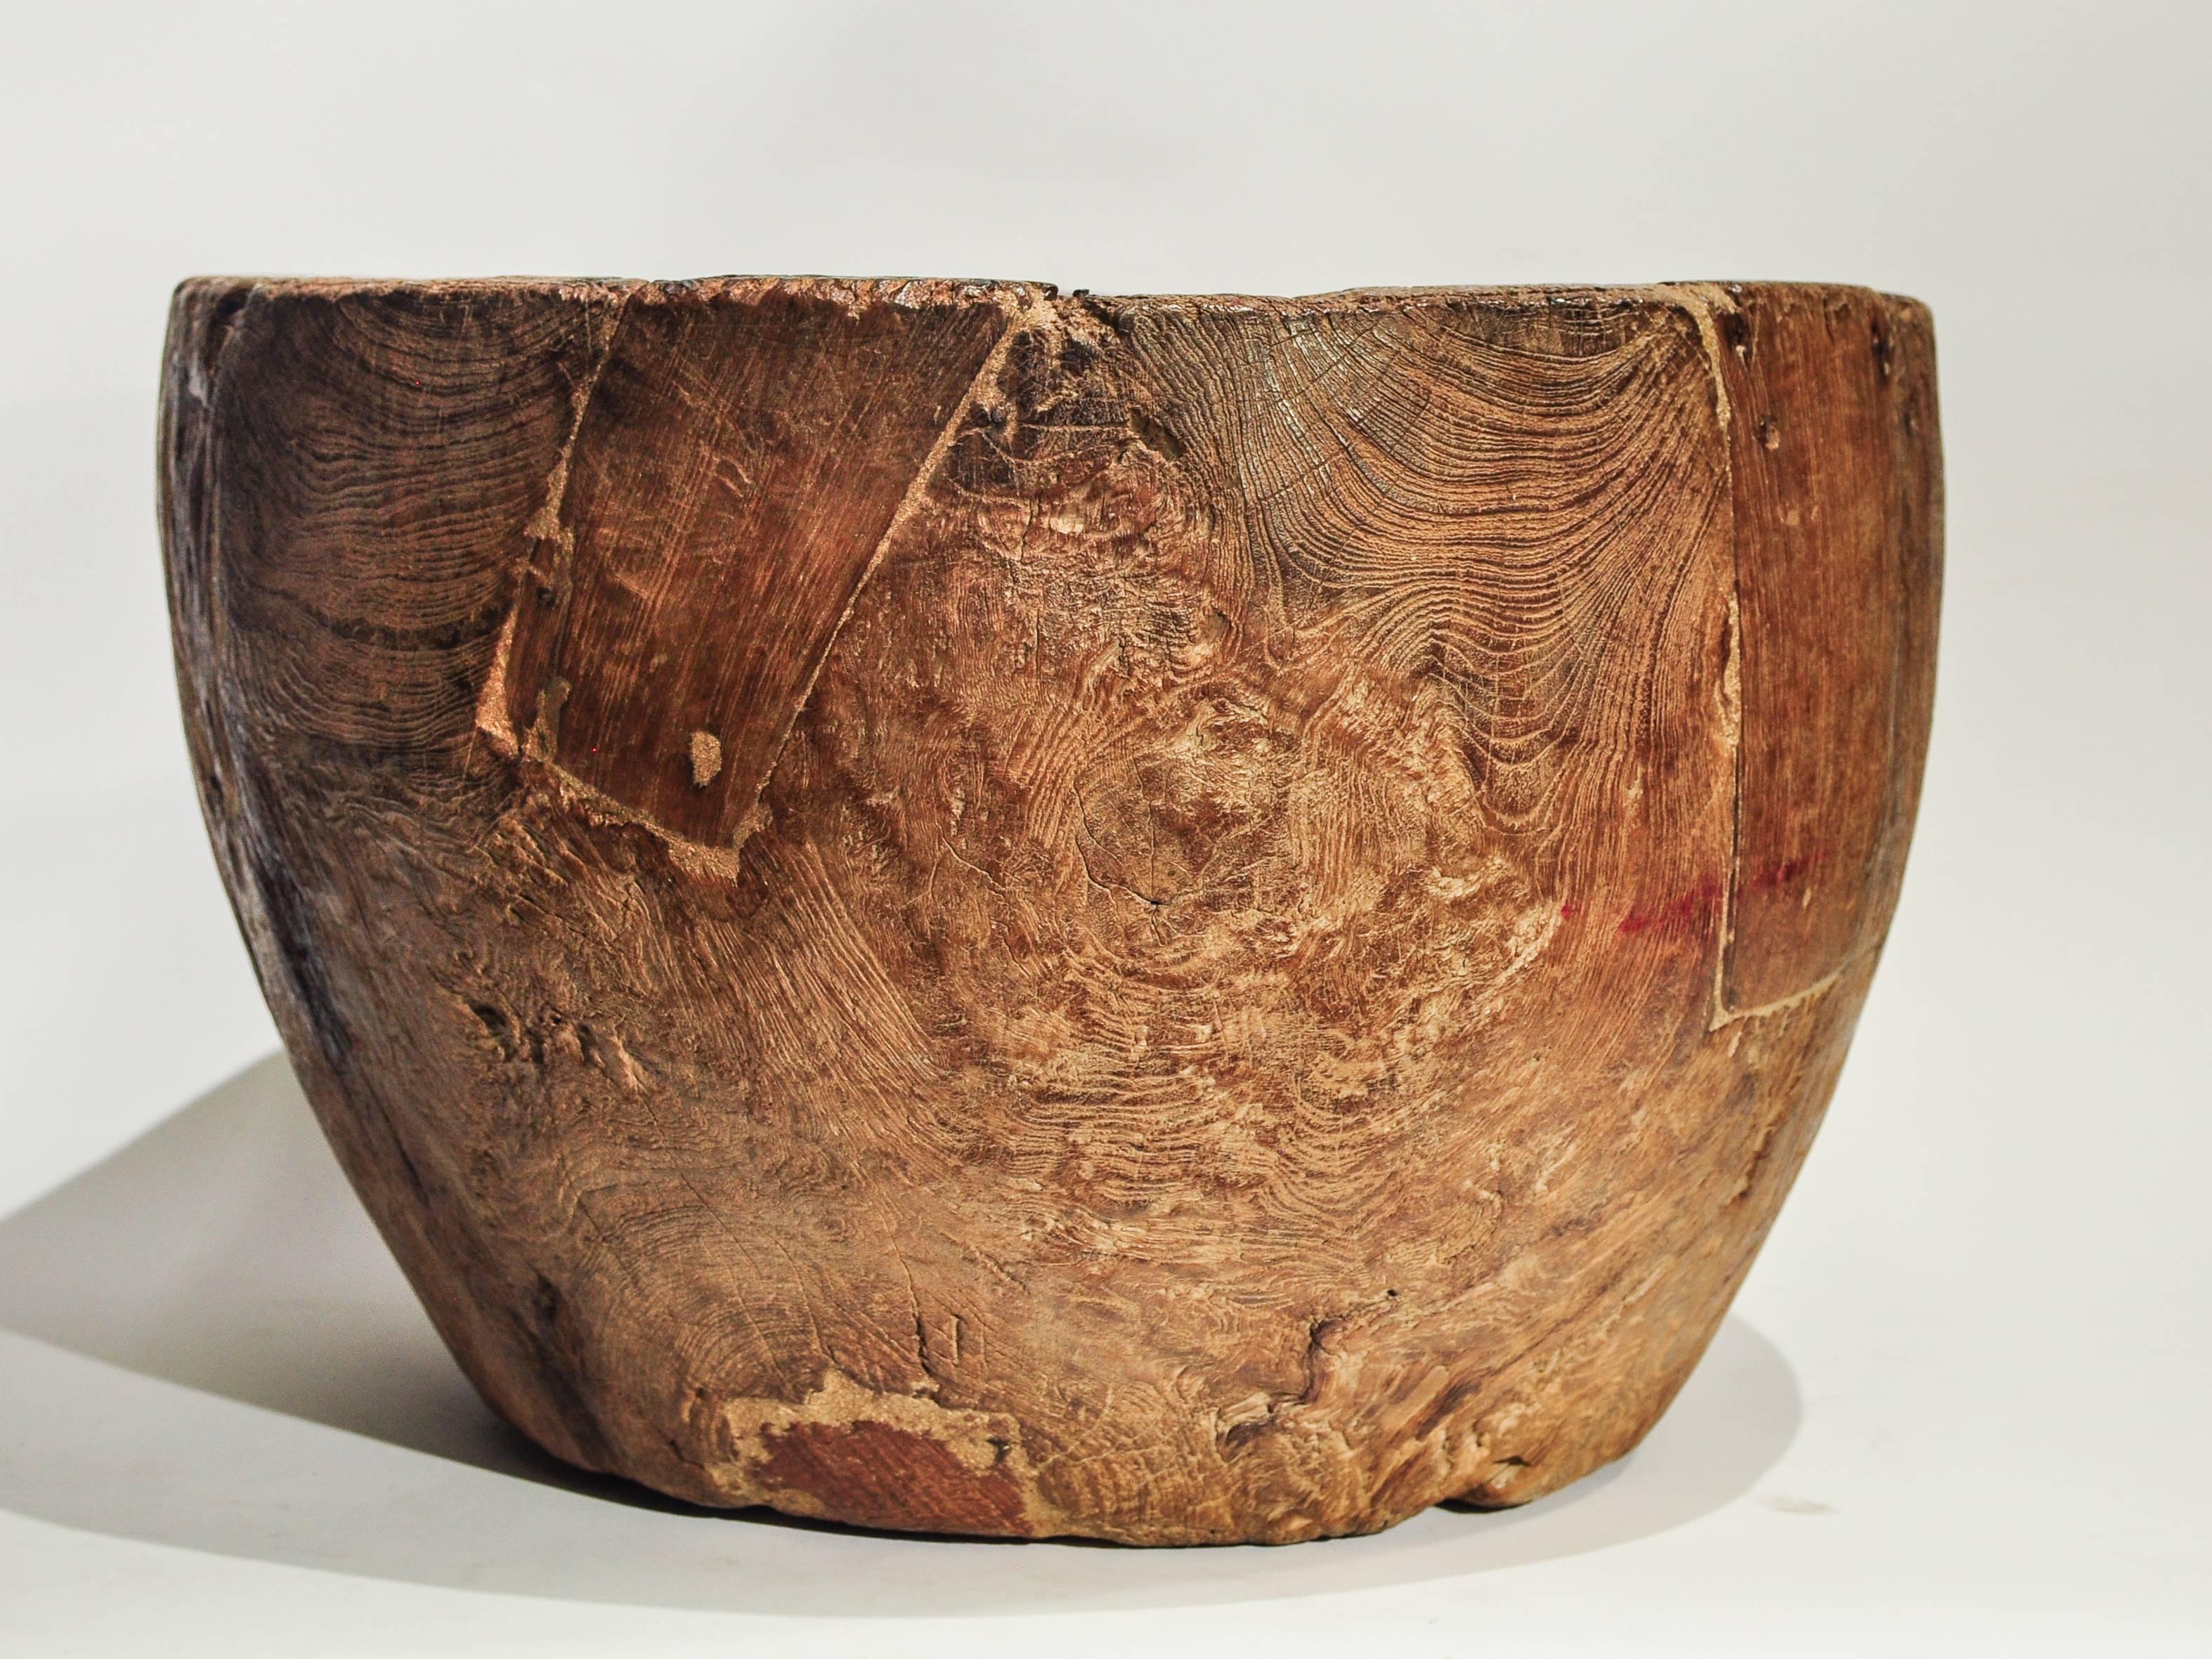 Large rustic teak burl bowl / feed trough. Madura Island, Java, early to mid-20th century.
Madura is famous in Indonesia for the rugged, gnarly quality of its teak. This large scale, heavy bowl was originally used as a feed trough for horses, and is